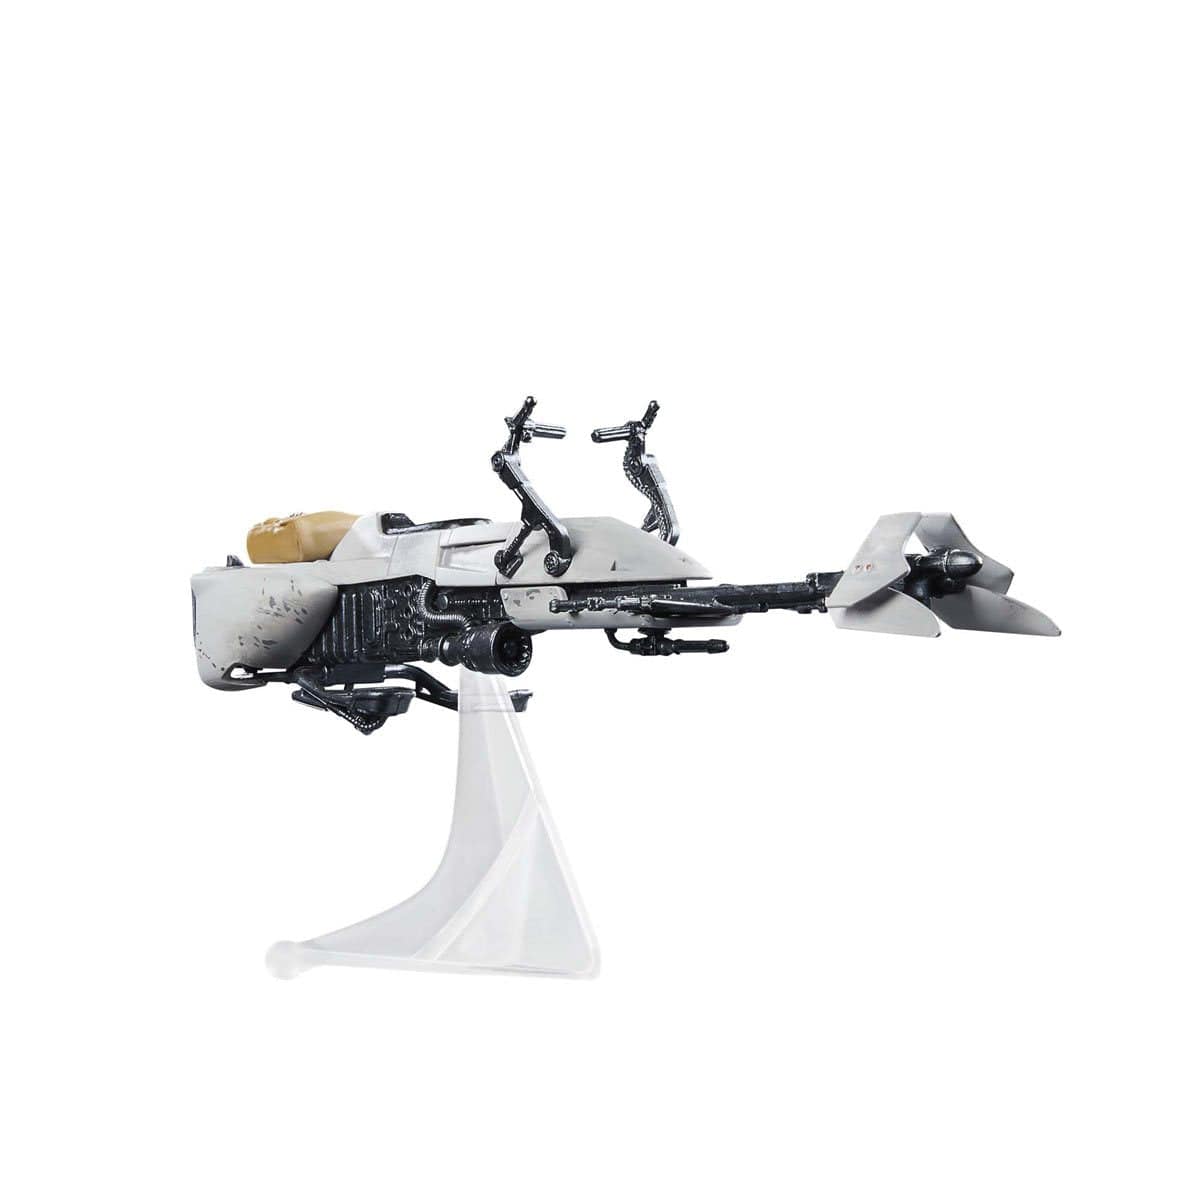 Star Wars The Vintage Collection Speeder Bike Vehicle with 3 3/4-Inch Scout Trooper and Grogu Action Figures